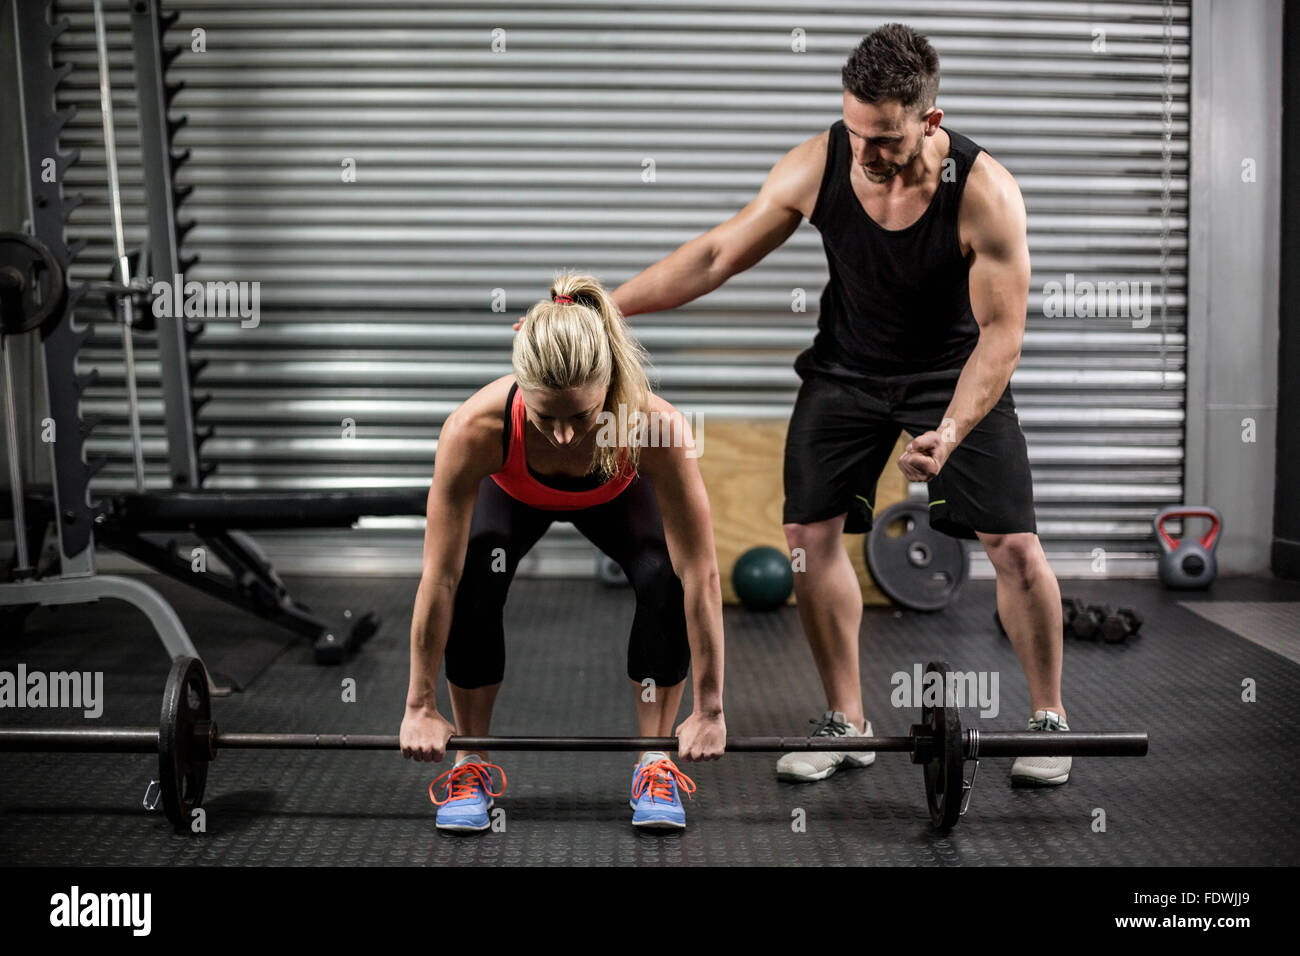 Trainer helping woman with barbell levage Banque D'Images